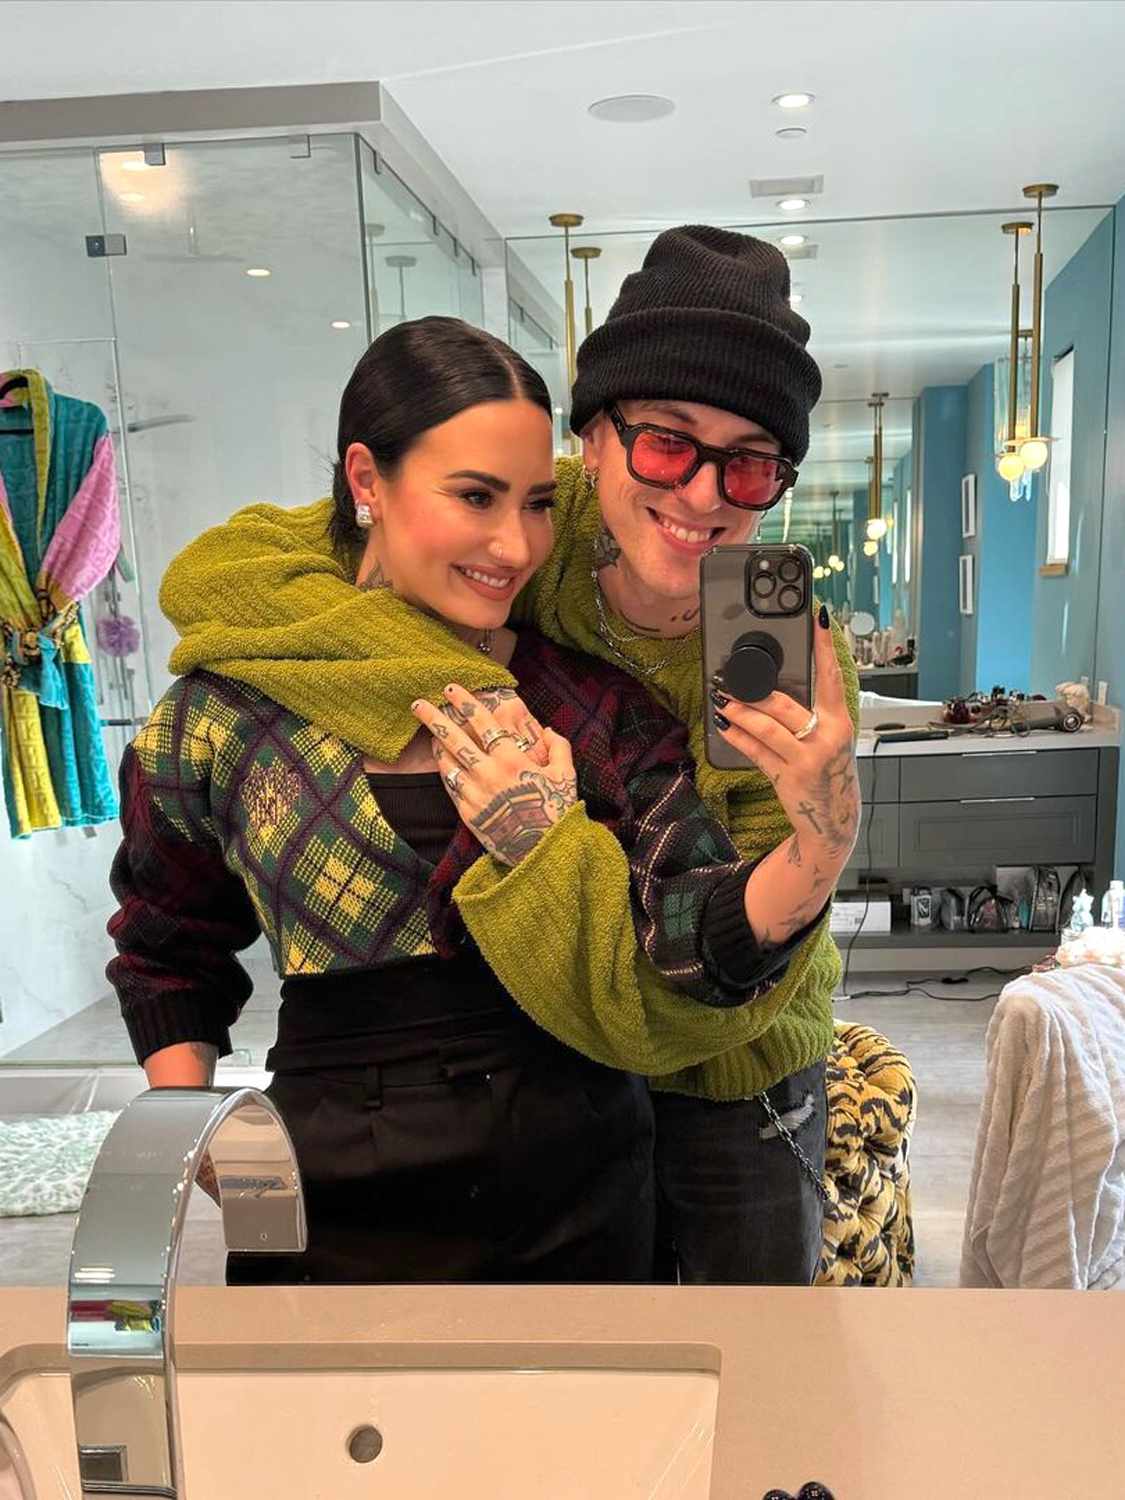 Demi Lovato Says She Wants the Goo Goo Dolls to Perform the First Dance Song at Her Wedding